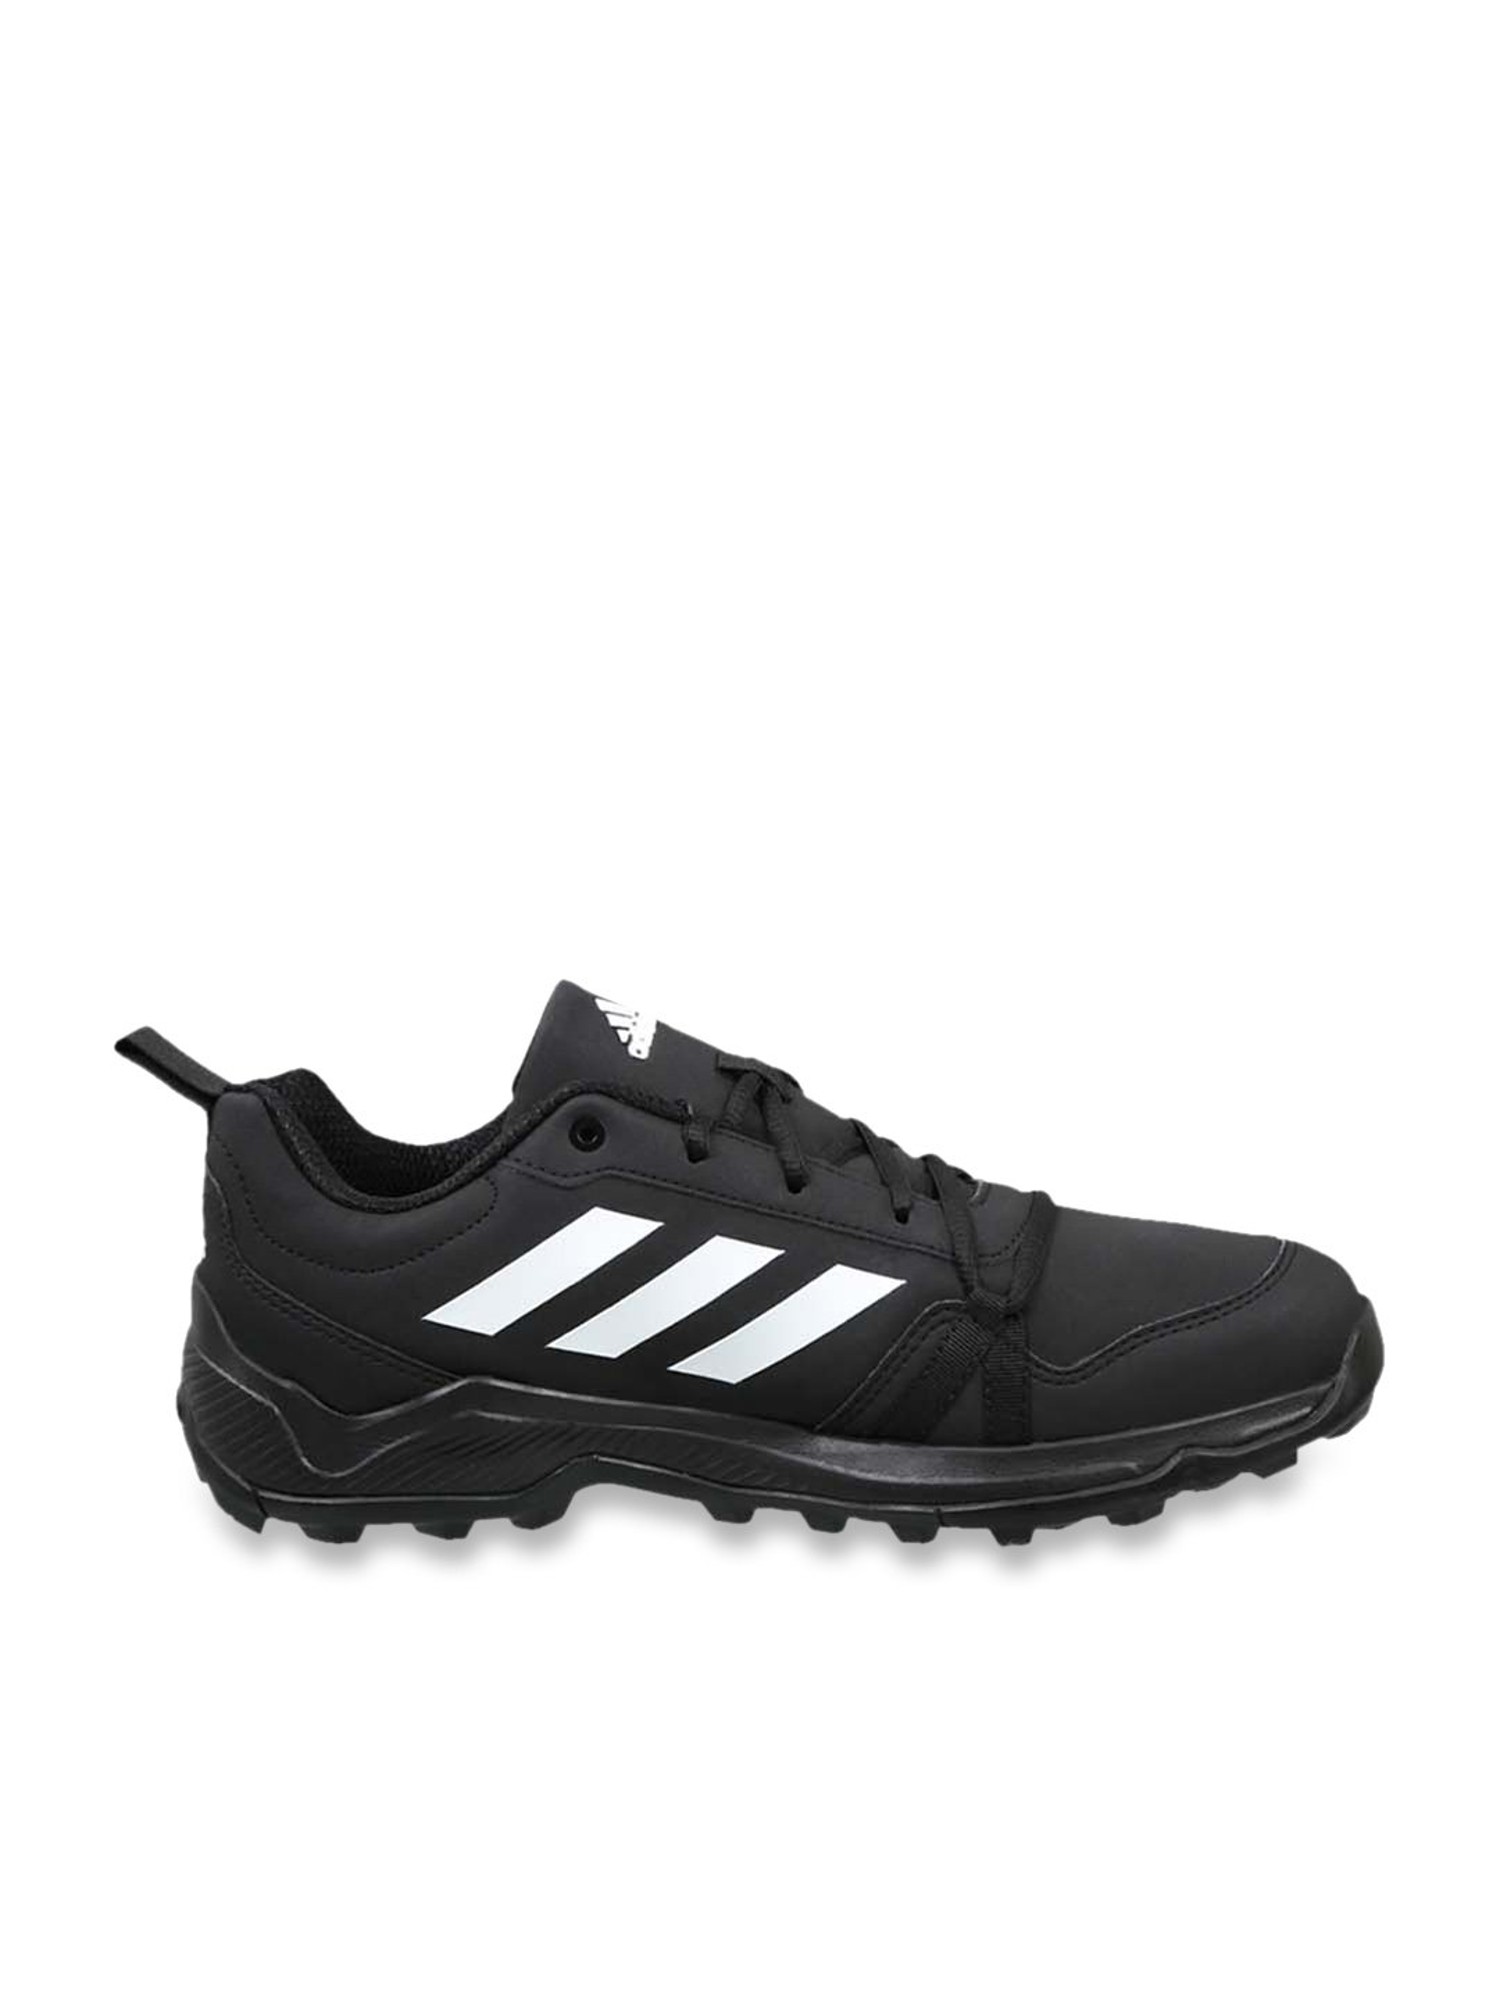 Men's Outdoor Shoes & Boots | adidas US